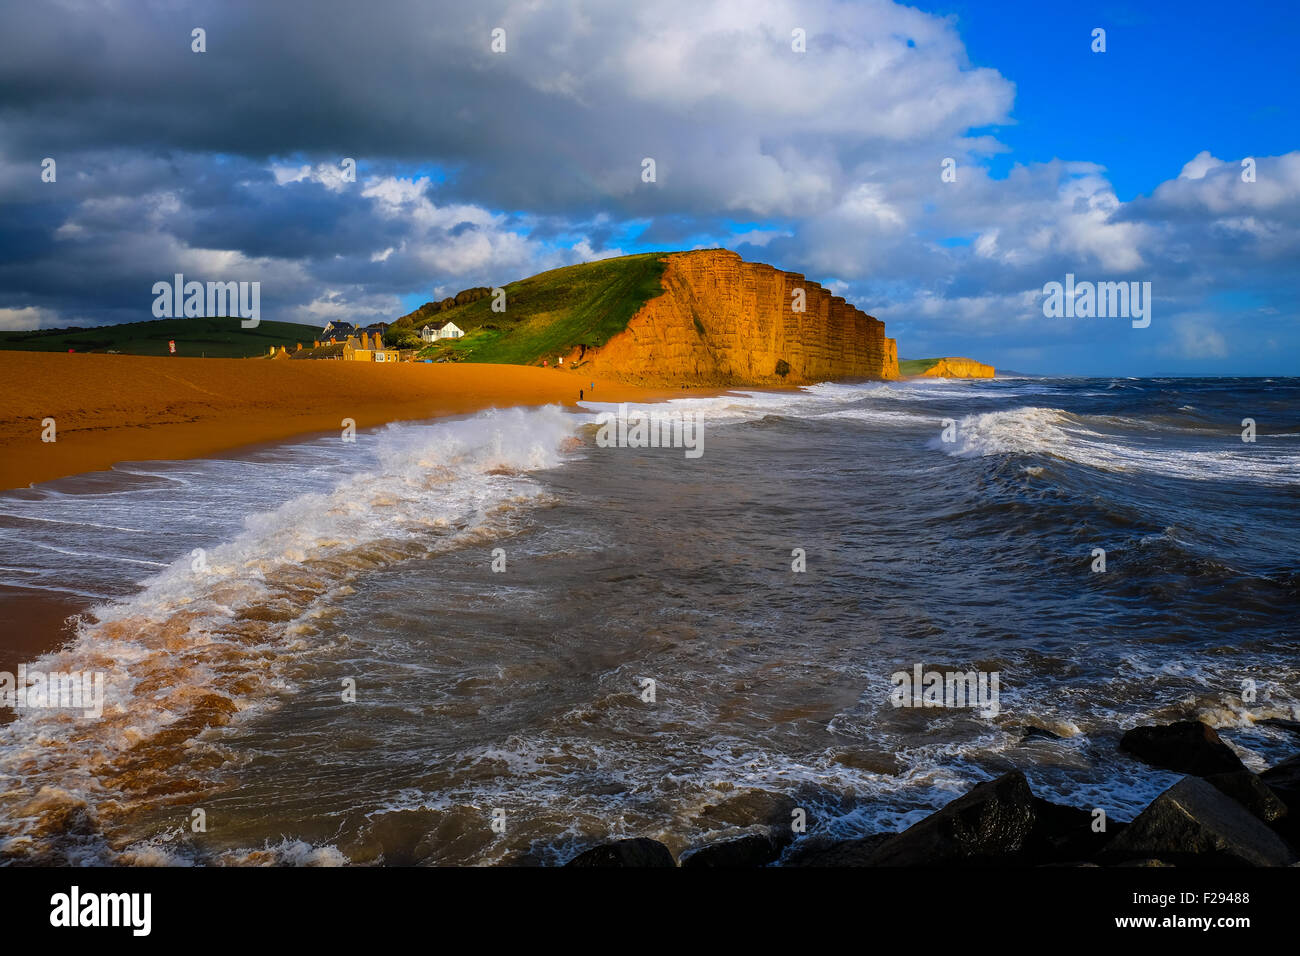 West Bay, Dorset, UK. 14 September 2015. Strong winds gusting at up to 55 mph and heavy rain showers batter the South West Coast at West Bay on Dorset's Jurassic coast as the Met Office issues a yellow weather warning. Credit:  Tom Corban/Alamy Live News Stock Photo